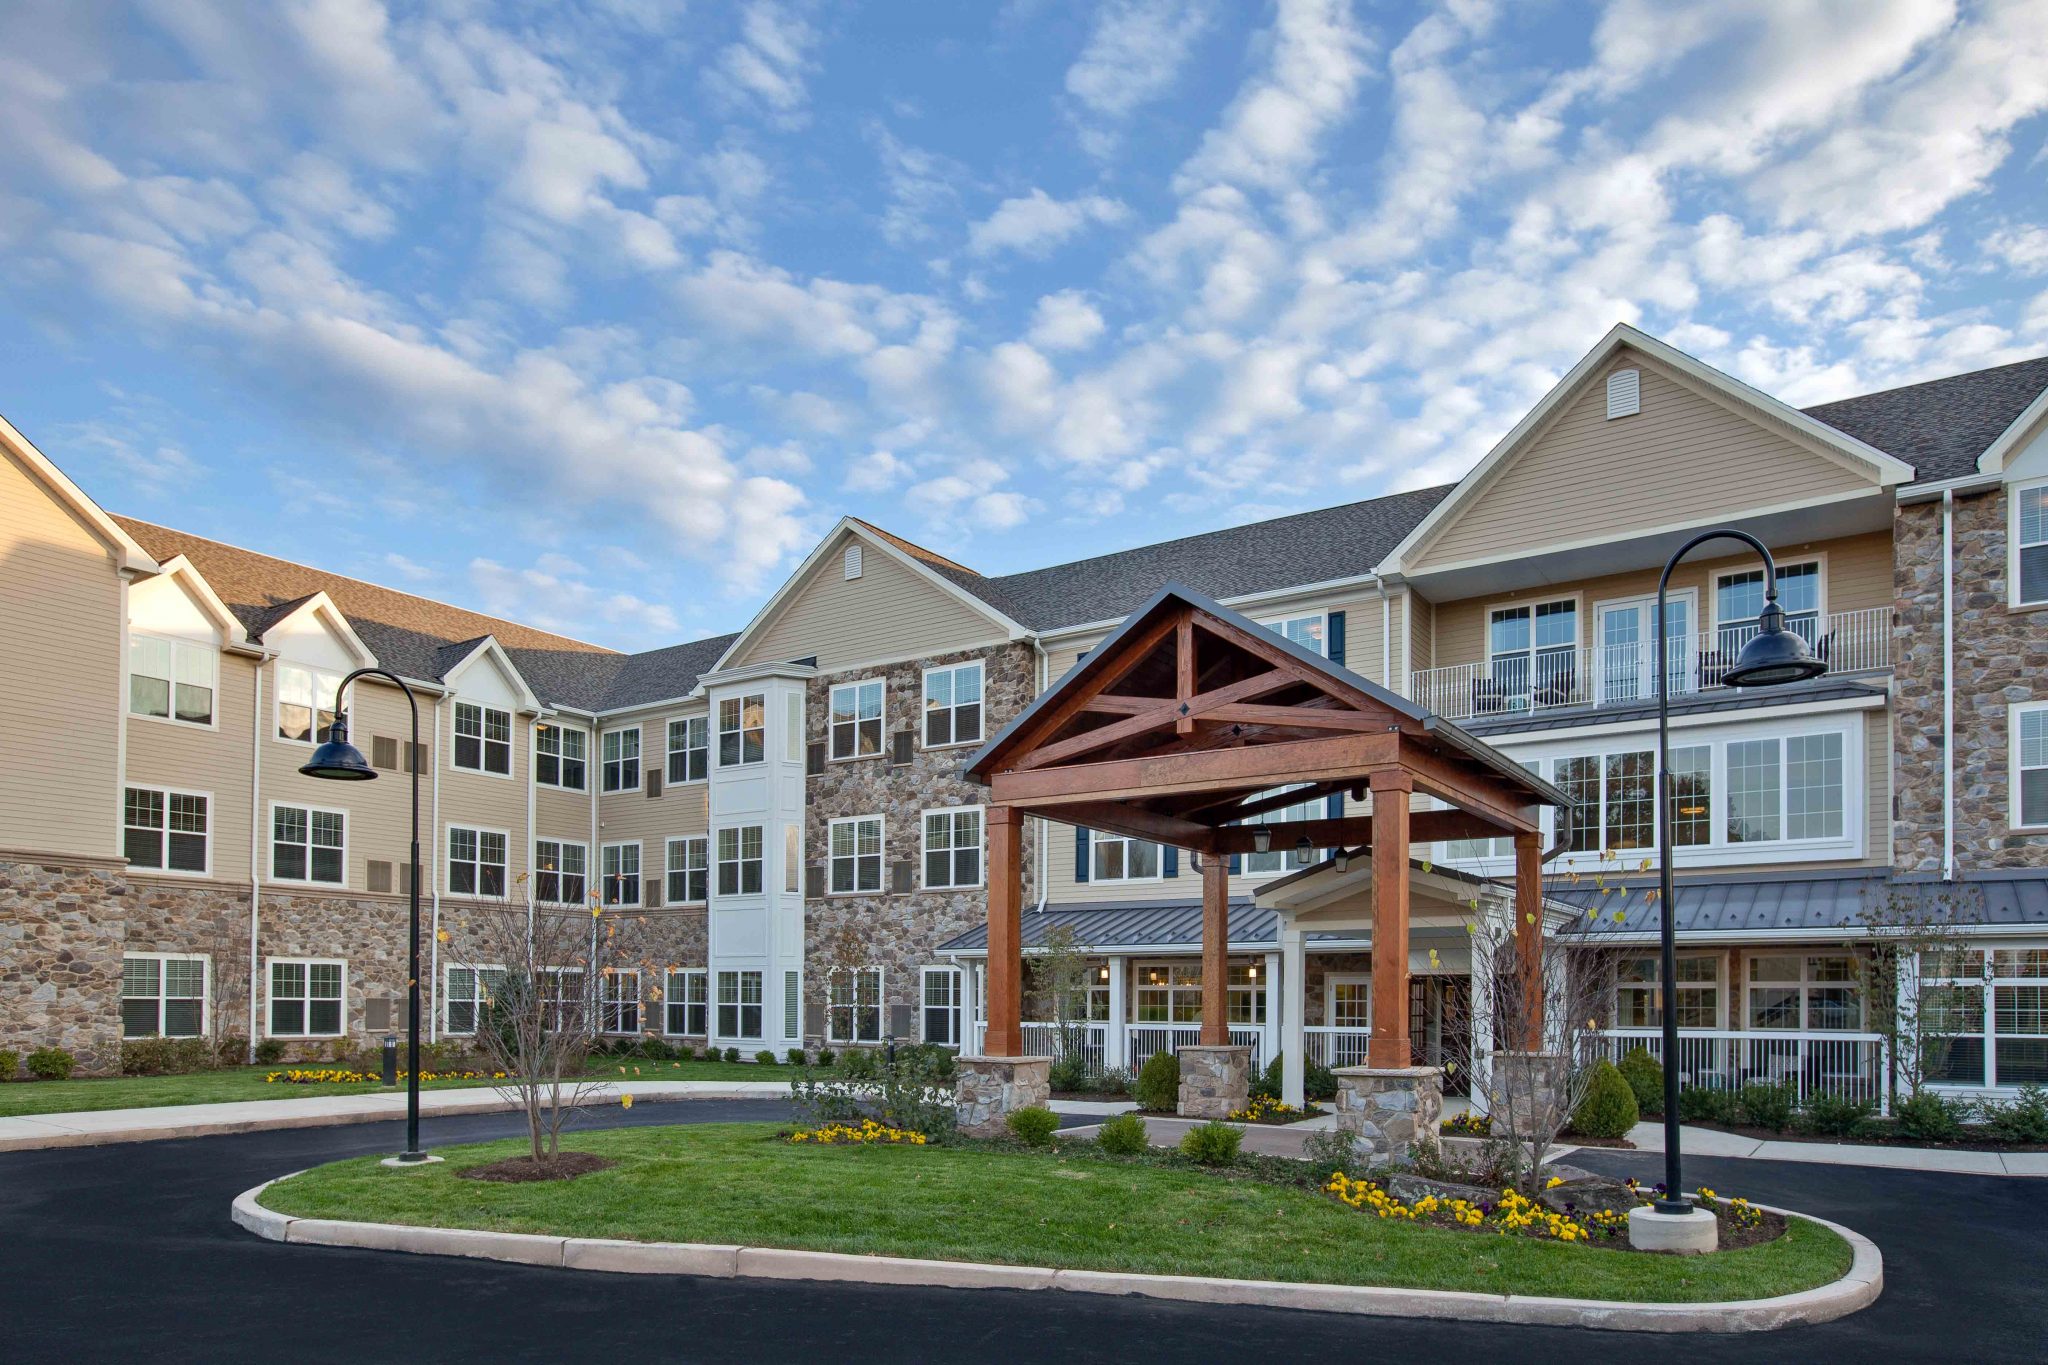 Exterior view of a multi-story senior living community building with landscaped front area.